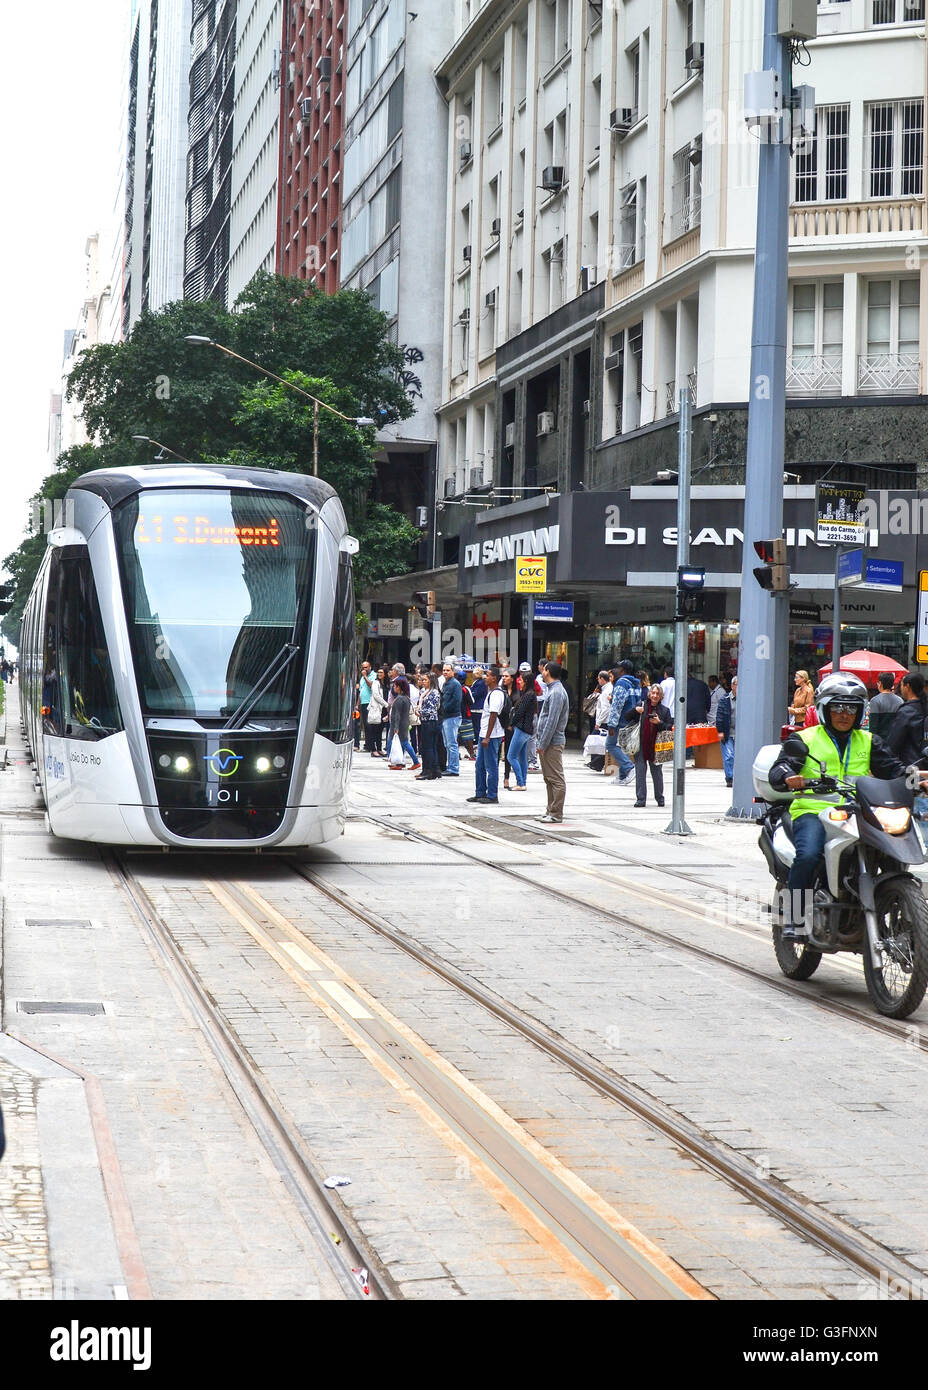 Downtown Rio de Janeiro, Brazil.09 June 2016.  Rio de Janeiro’s VLT, the new overground train system, is being tested and is carrying passengers, free of charge, from Santos Dumont’s airport to Praca Maua. AlessandraRC/Alamy Live News Stock Photo